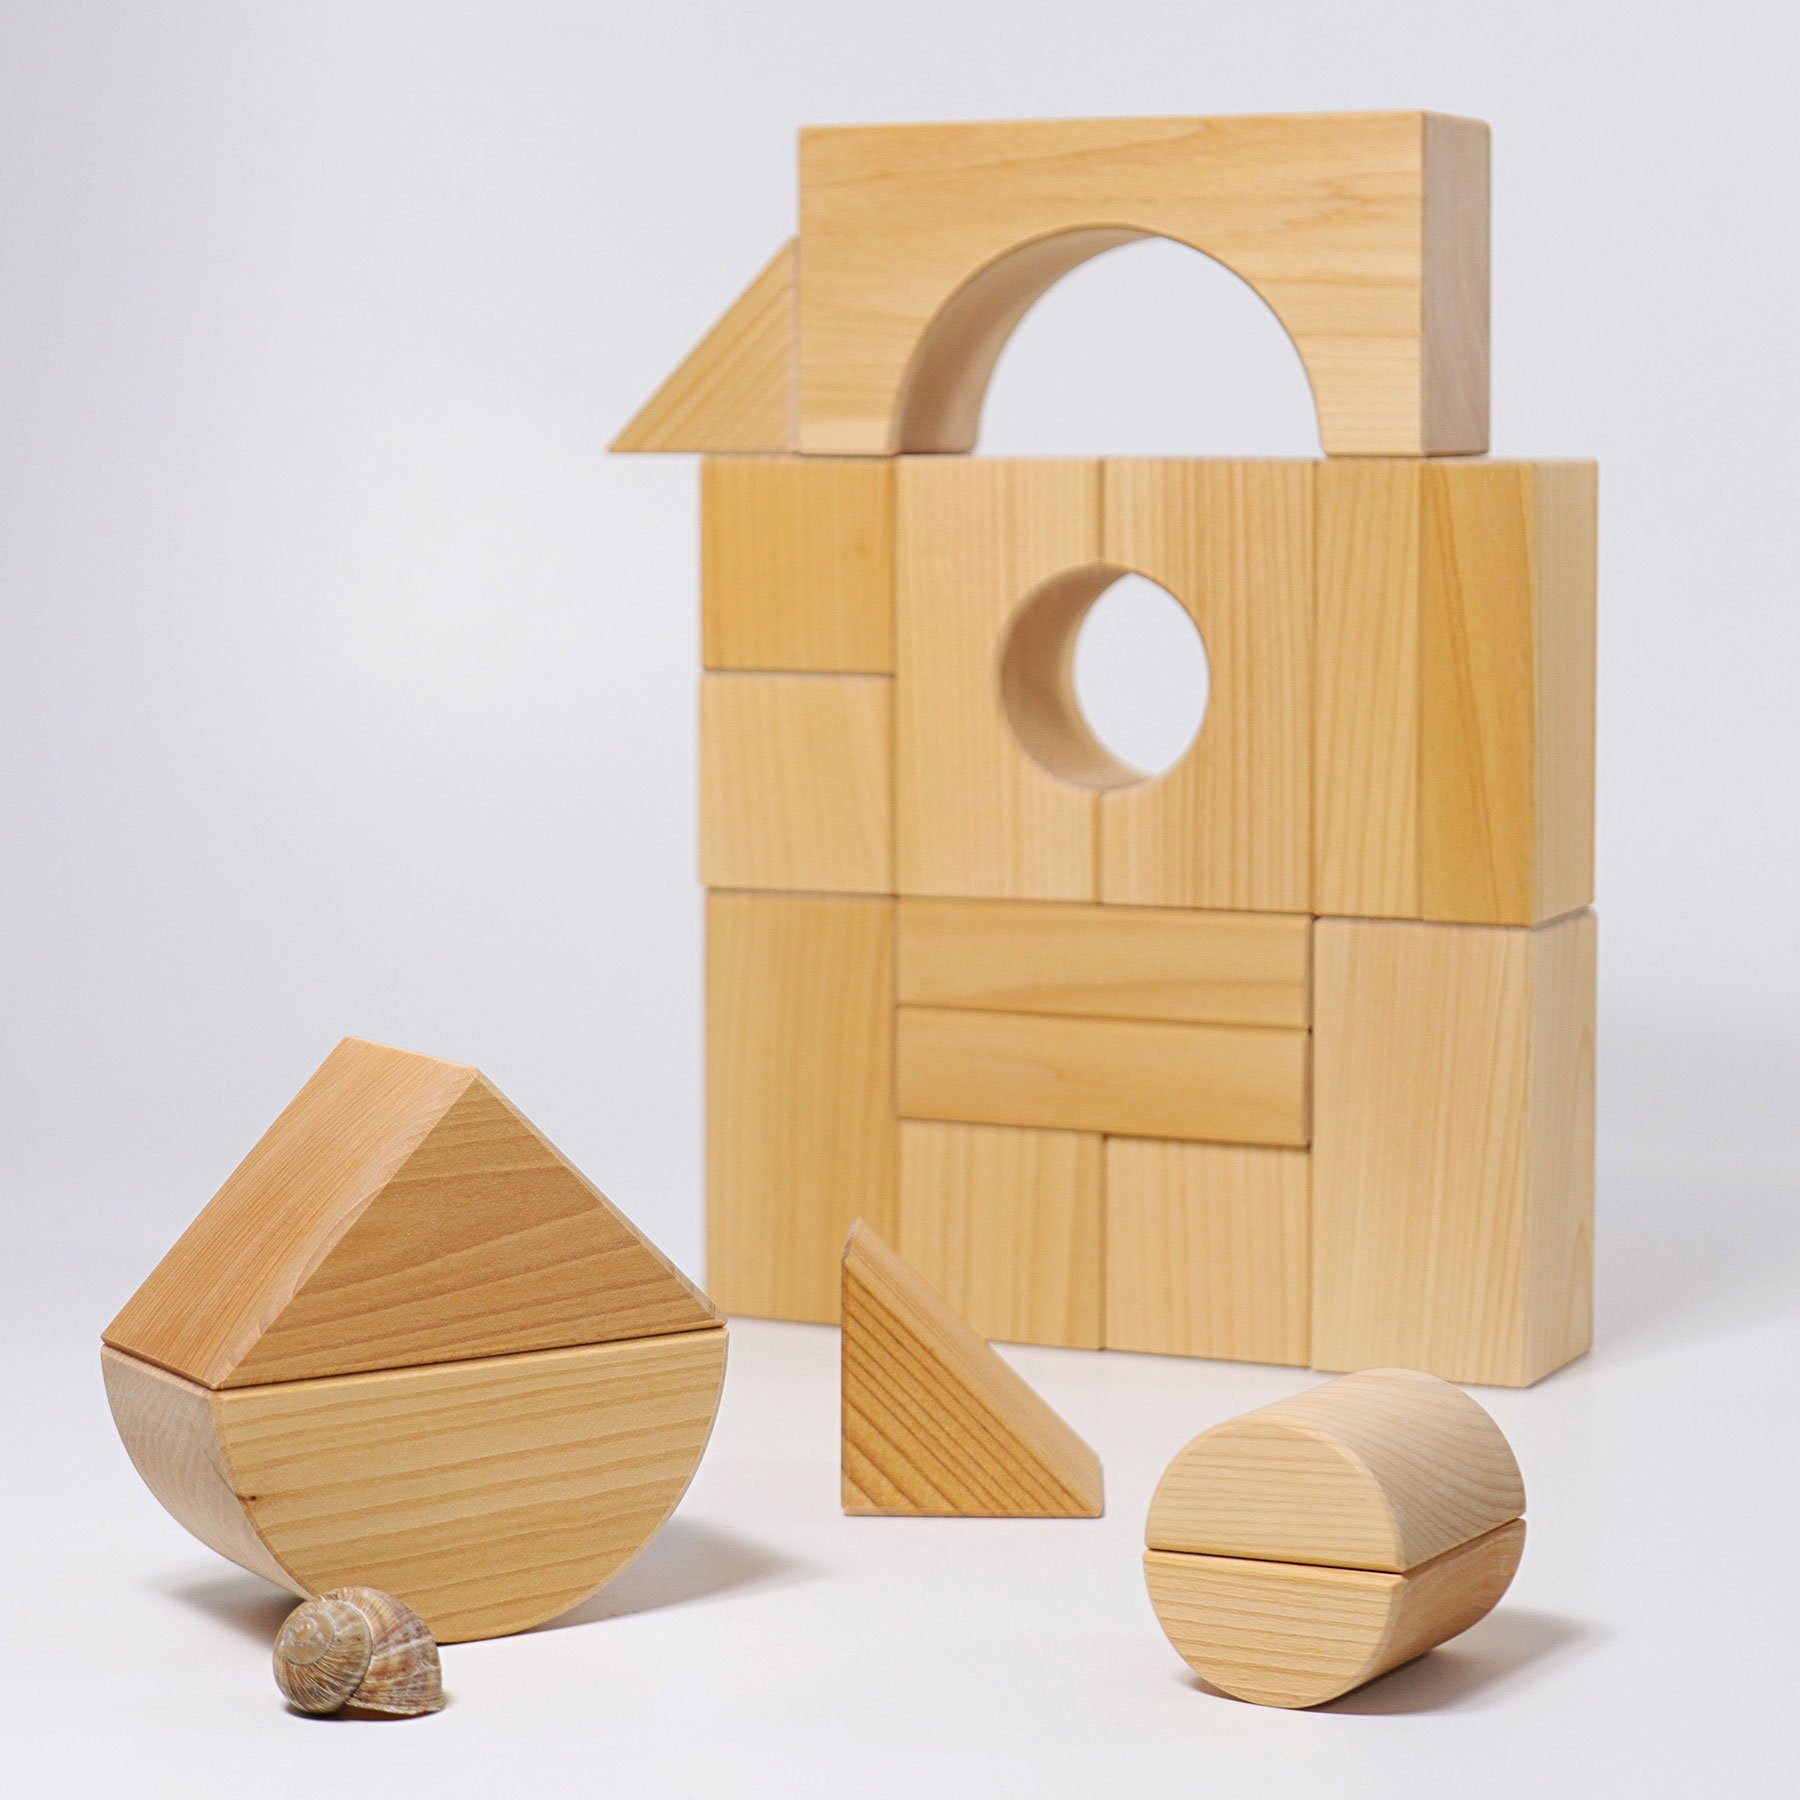 giant building blocks, natural wood finish; seas shell in picture to show size